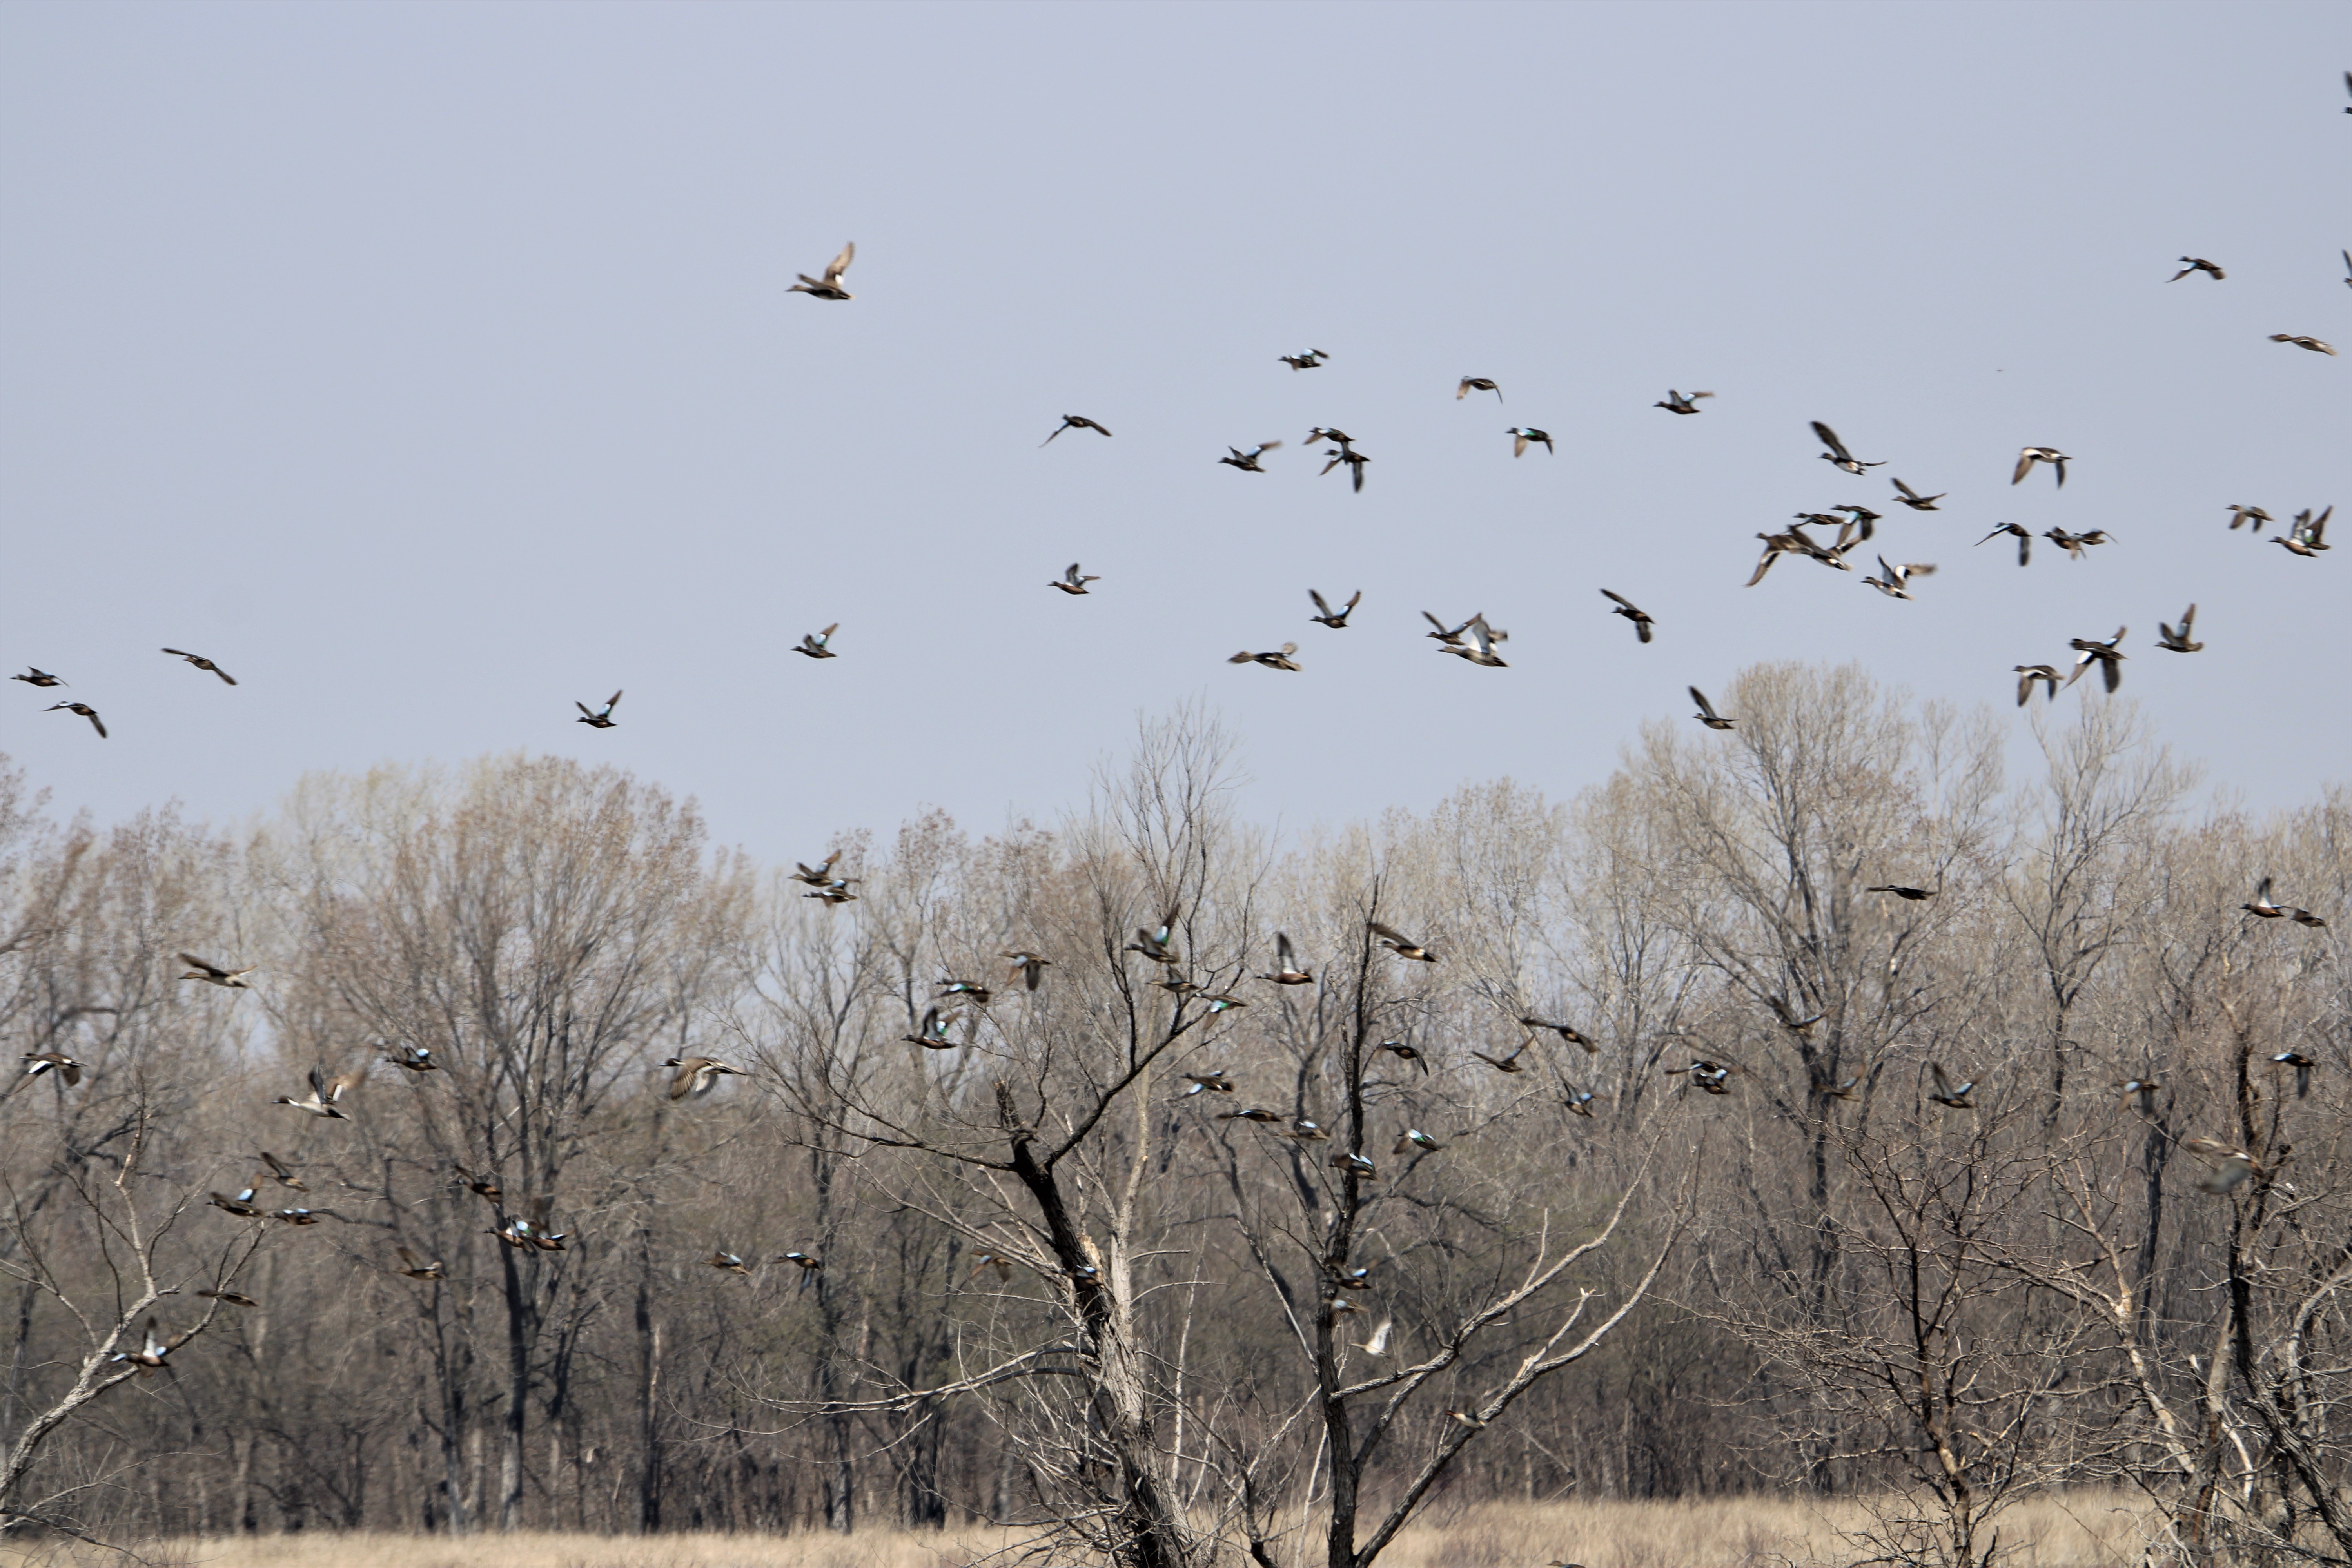 Numerous ducks in flight over a spring landscape of leafless trees